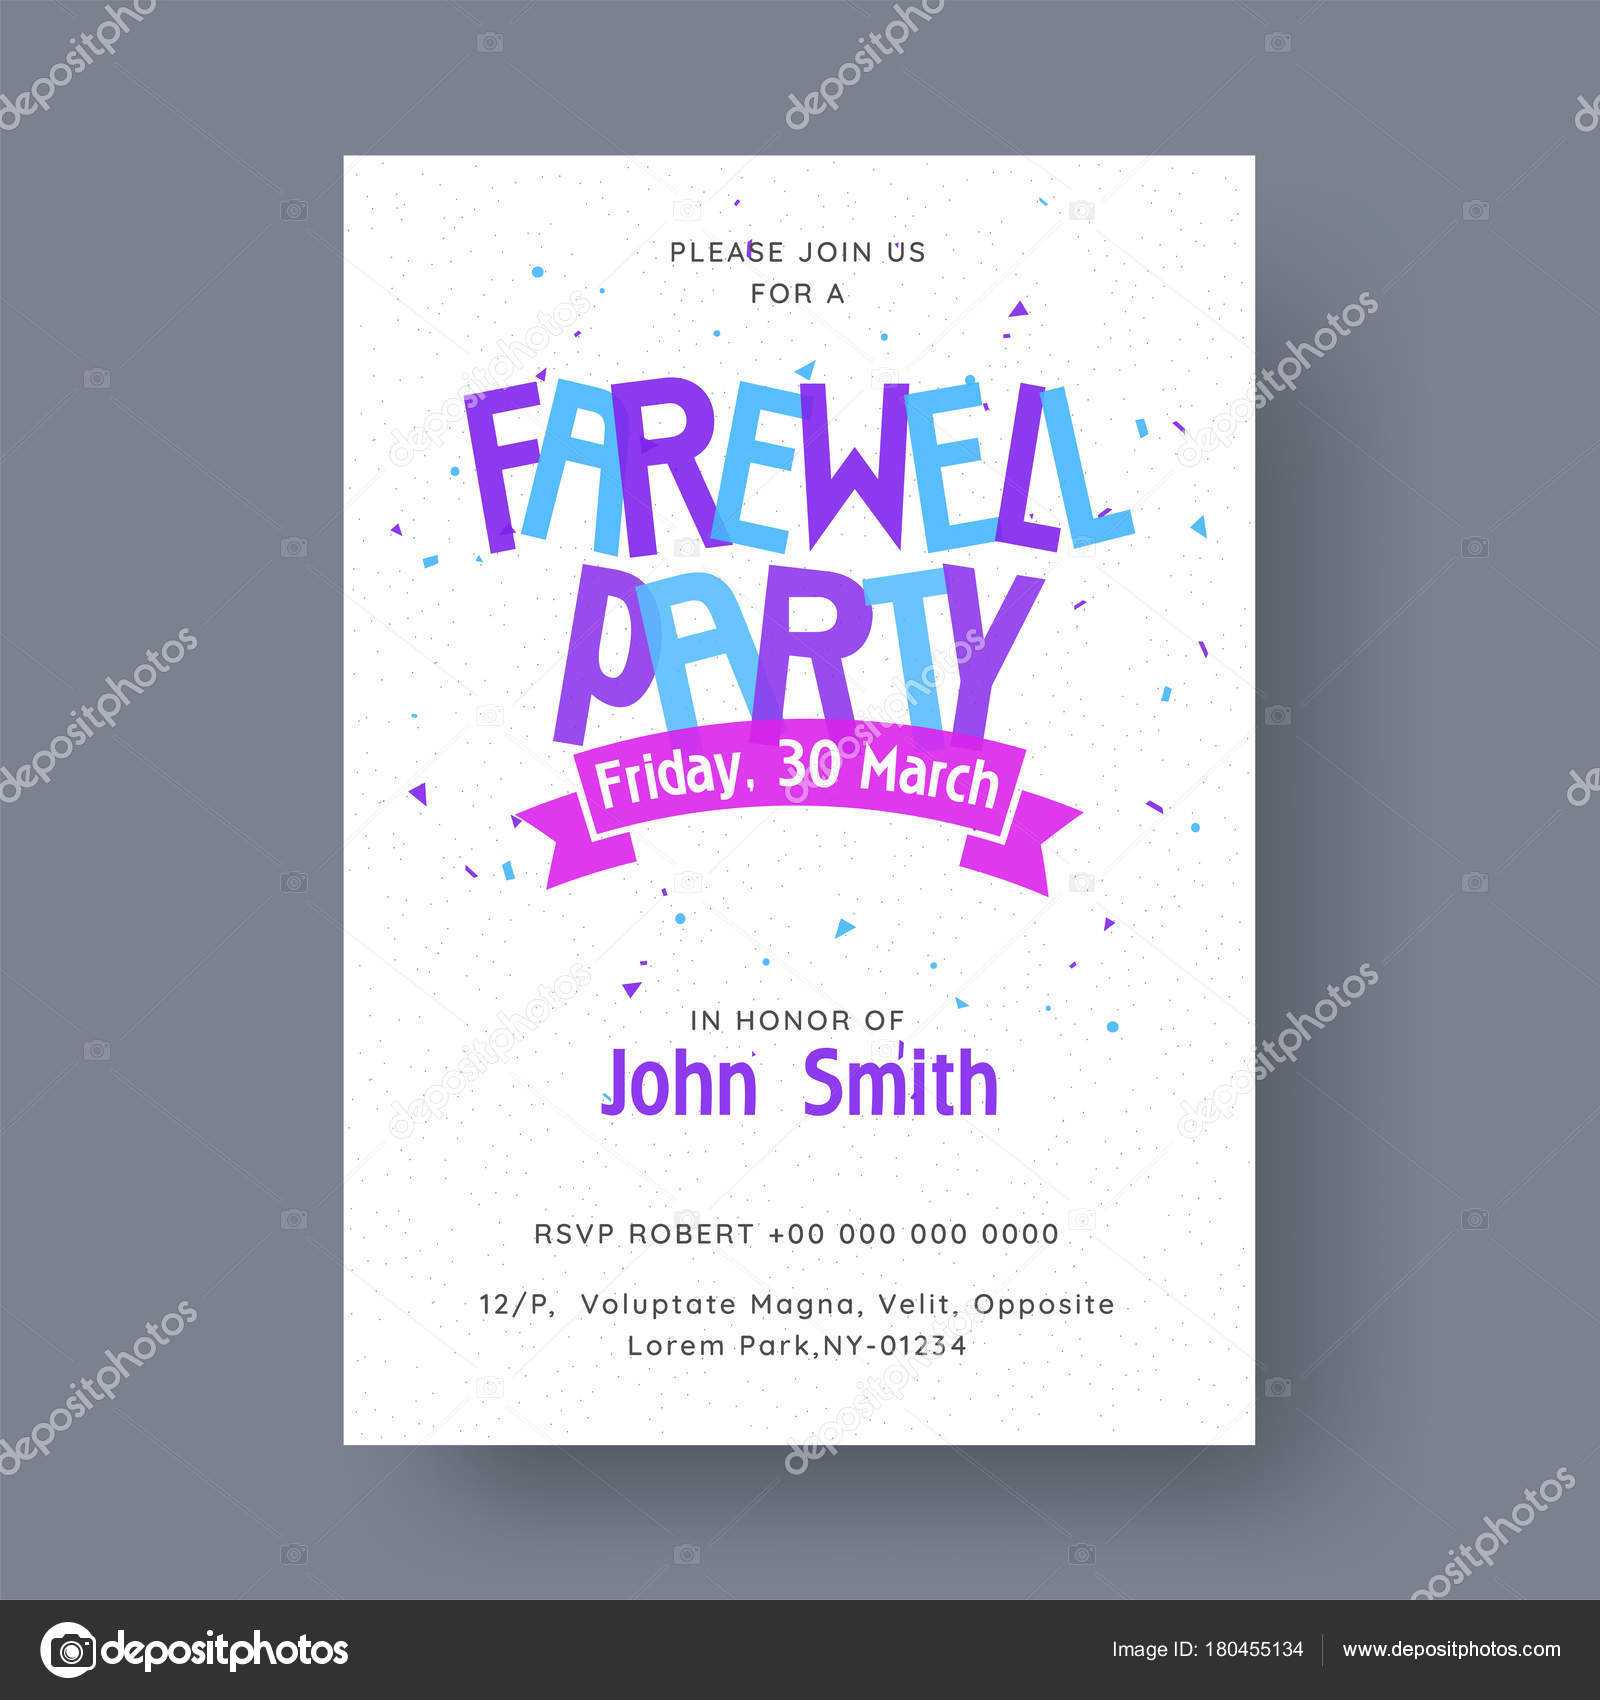 Images: Farewell Invitation Card | Farewell Party Banner, Or Throughout Farewell Invitation Card Template